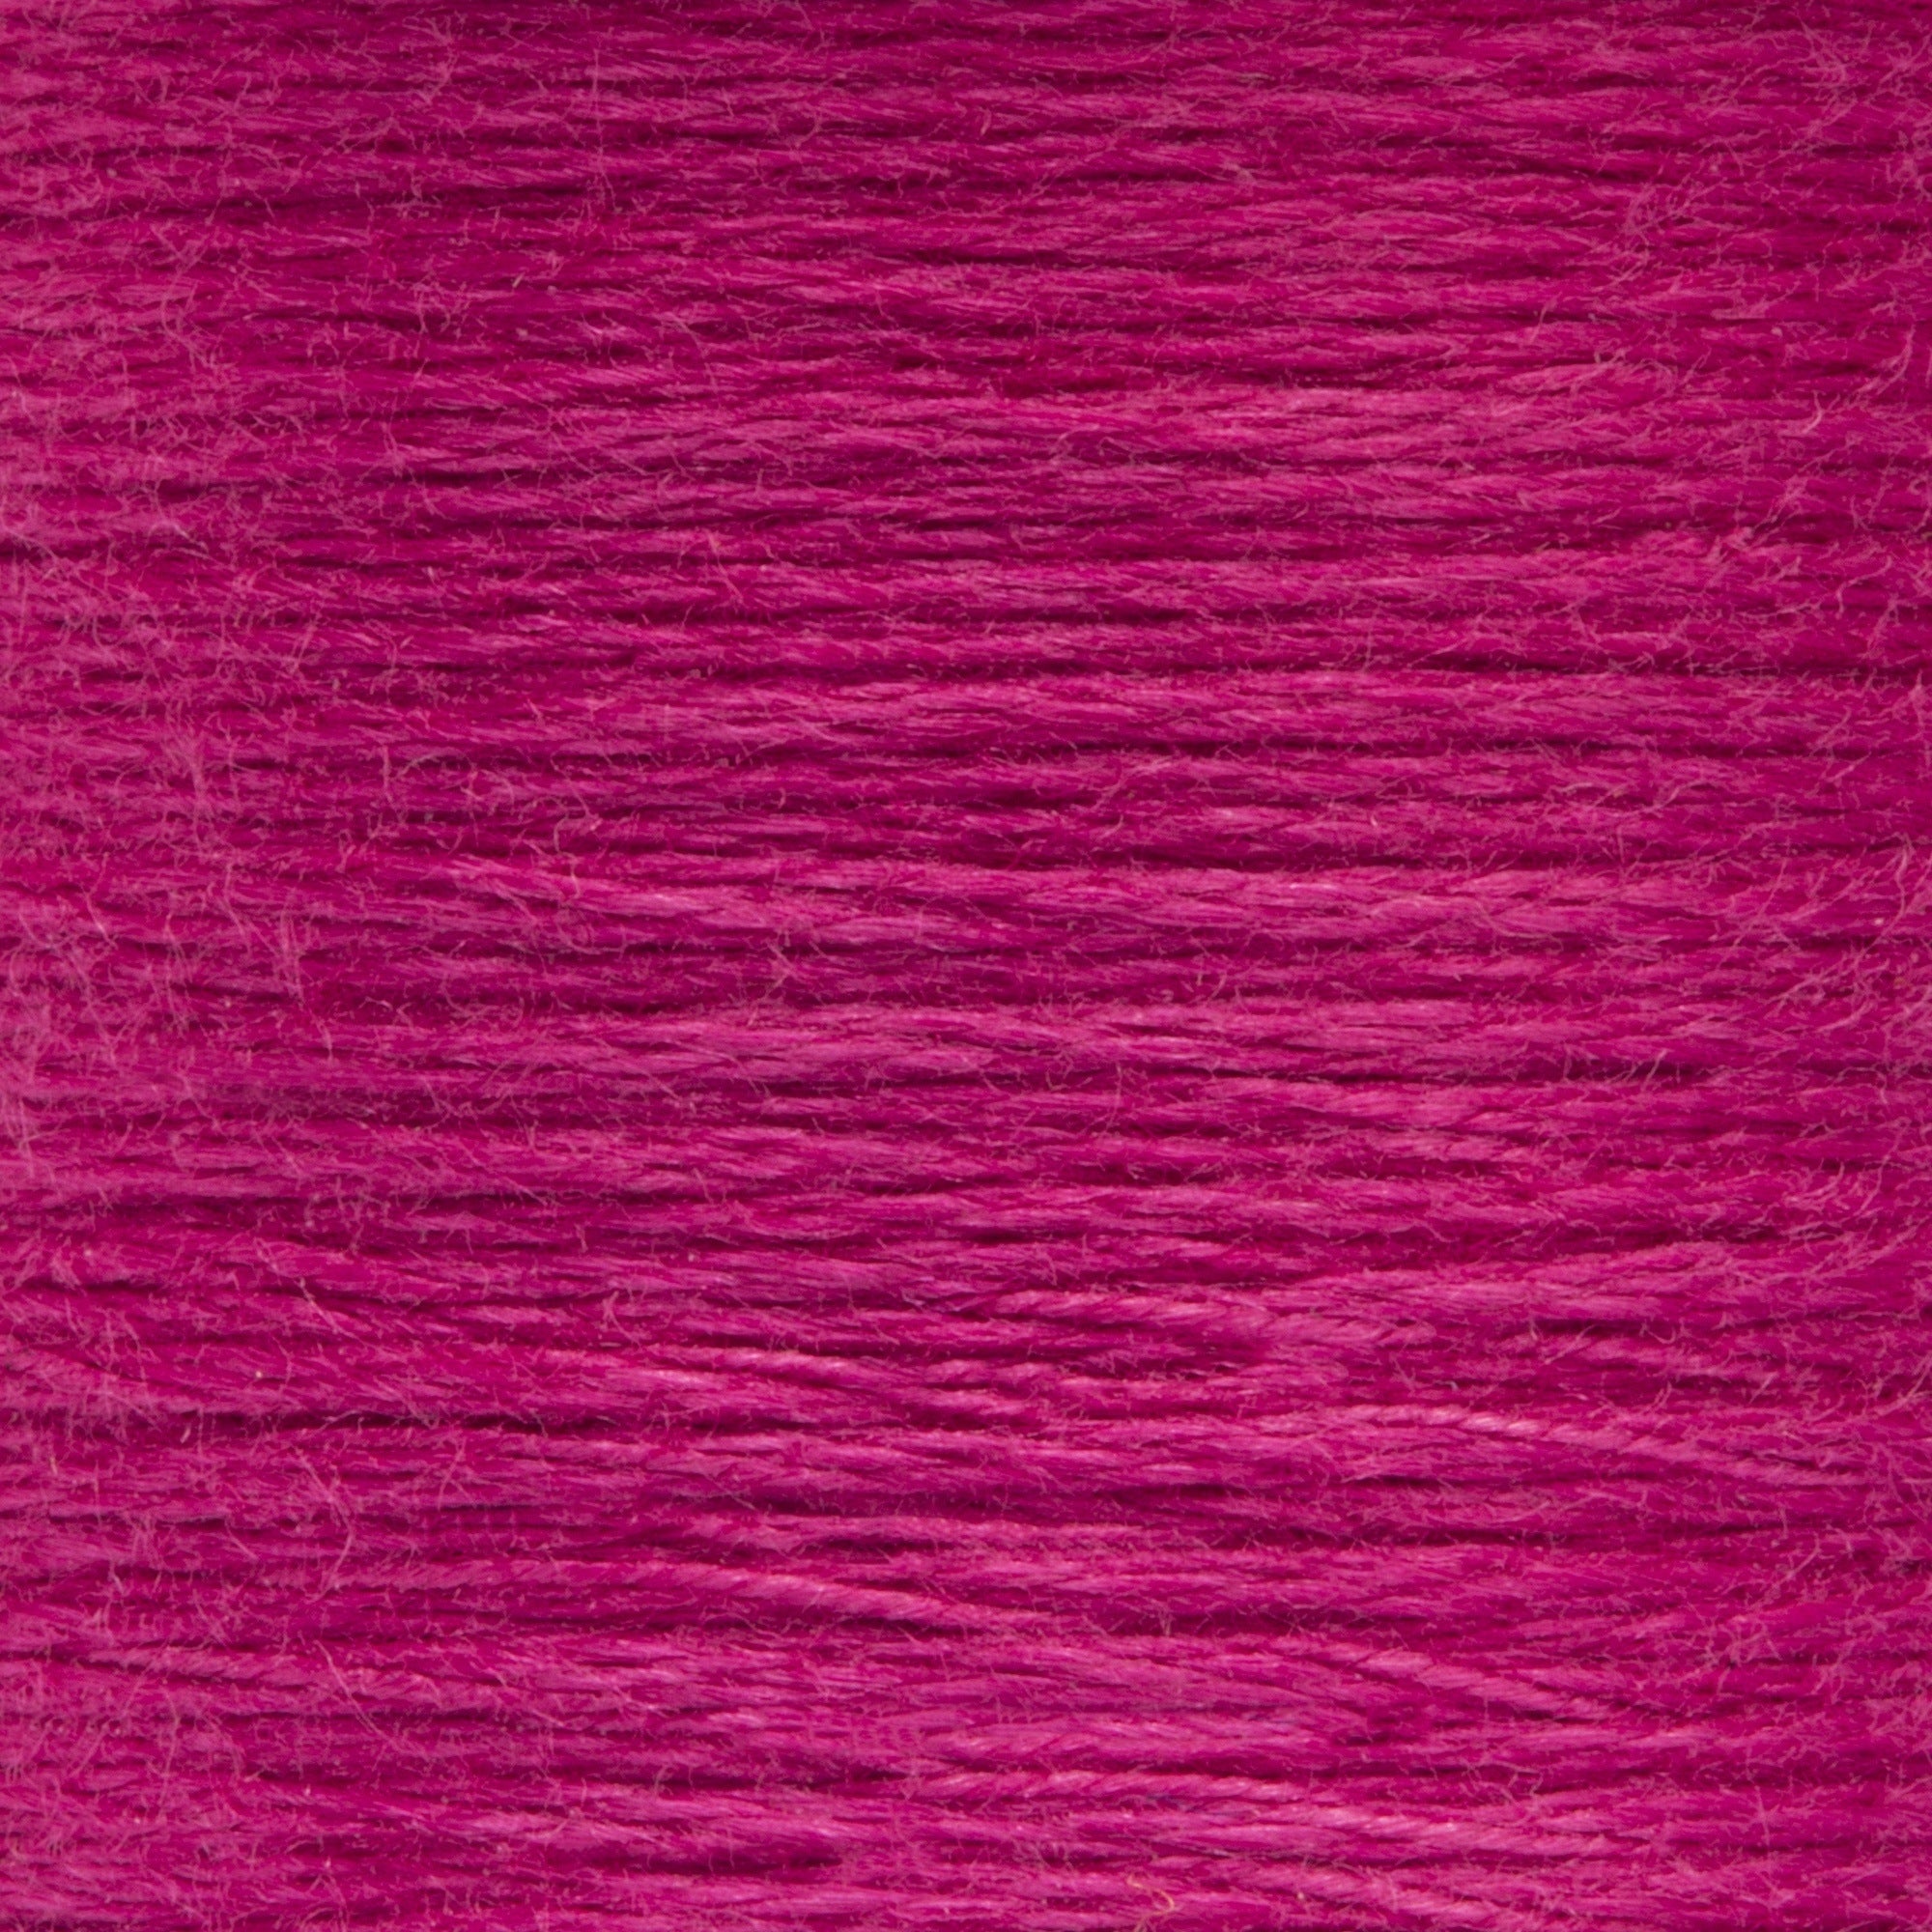 Anchor Embroidery Floss in Antique Rose Dk